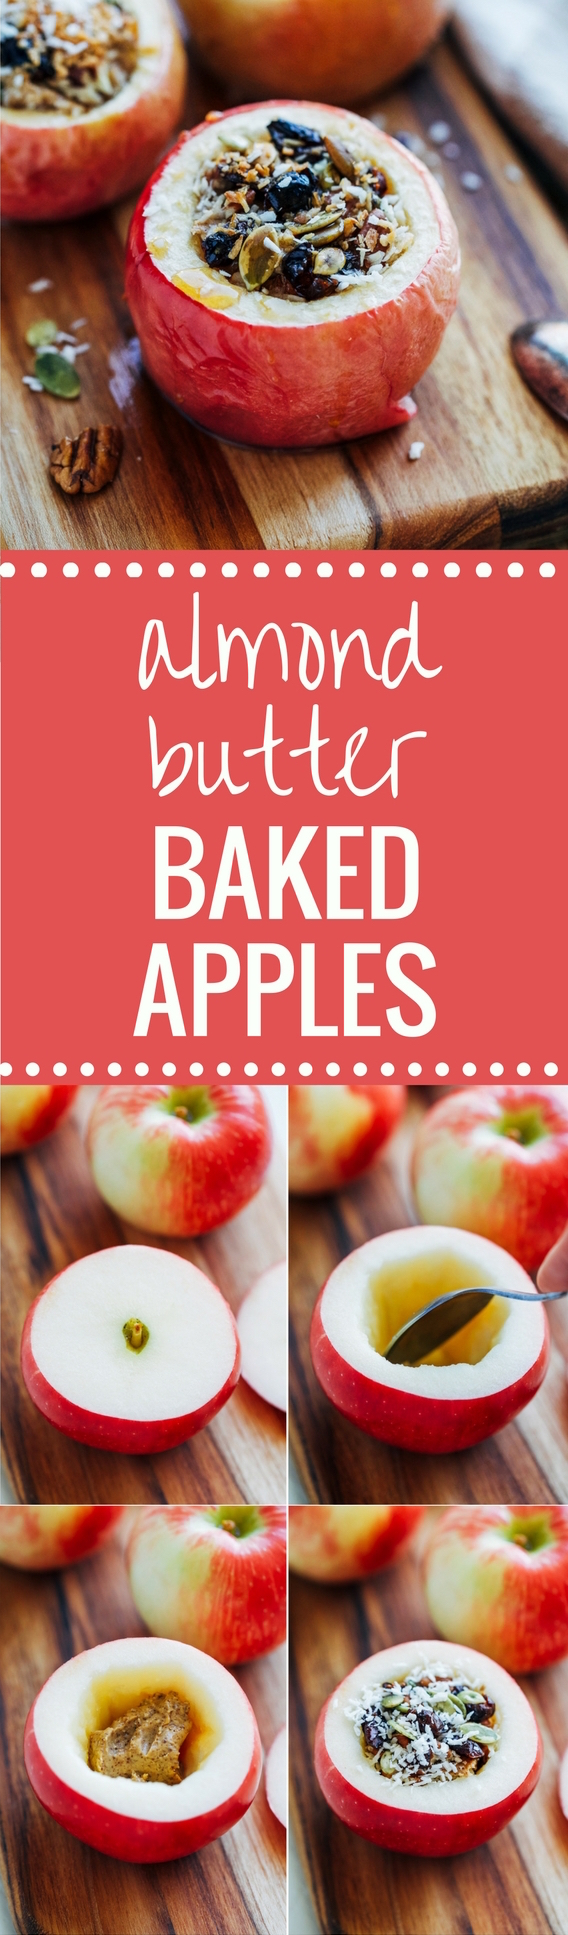 Almond Butter Baked Apples- sweet baked apples stuffed with melty vanilla almond butter.